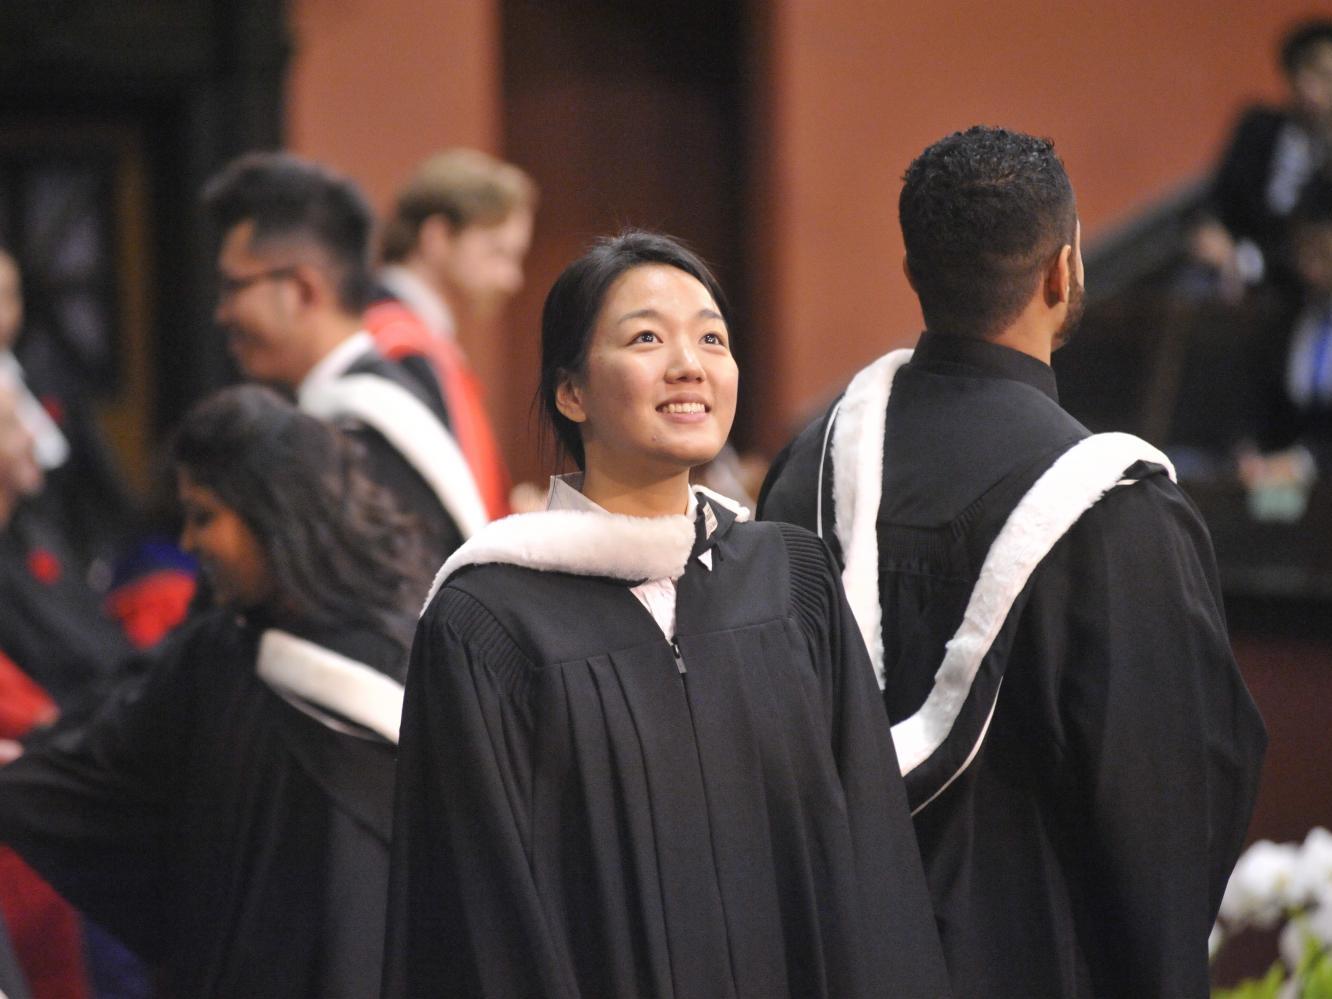 Student in regalia at convocation hall 